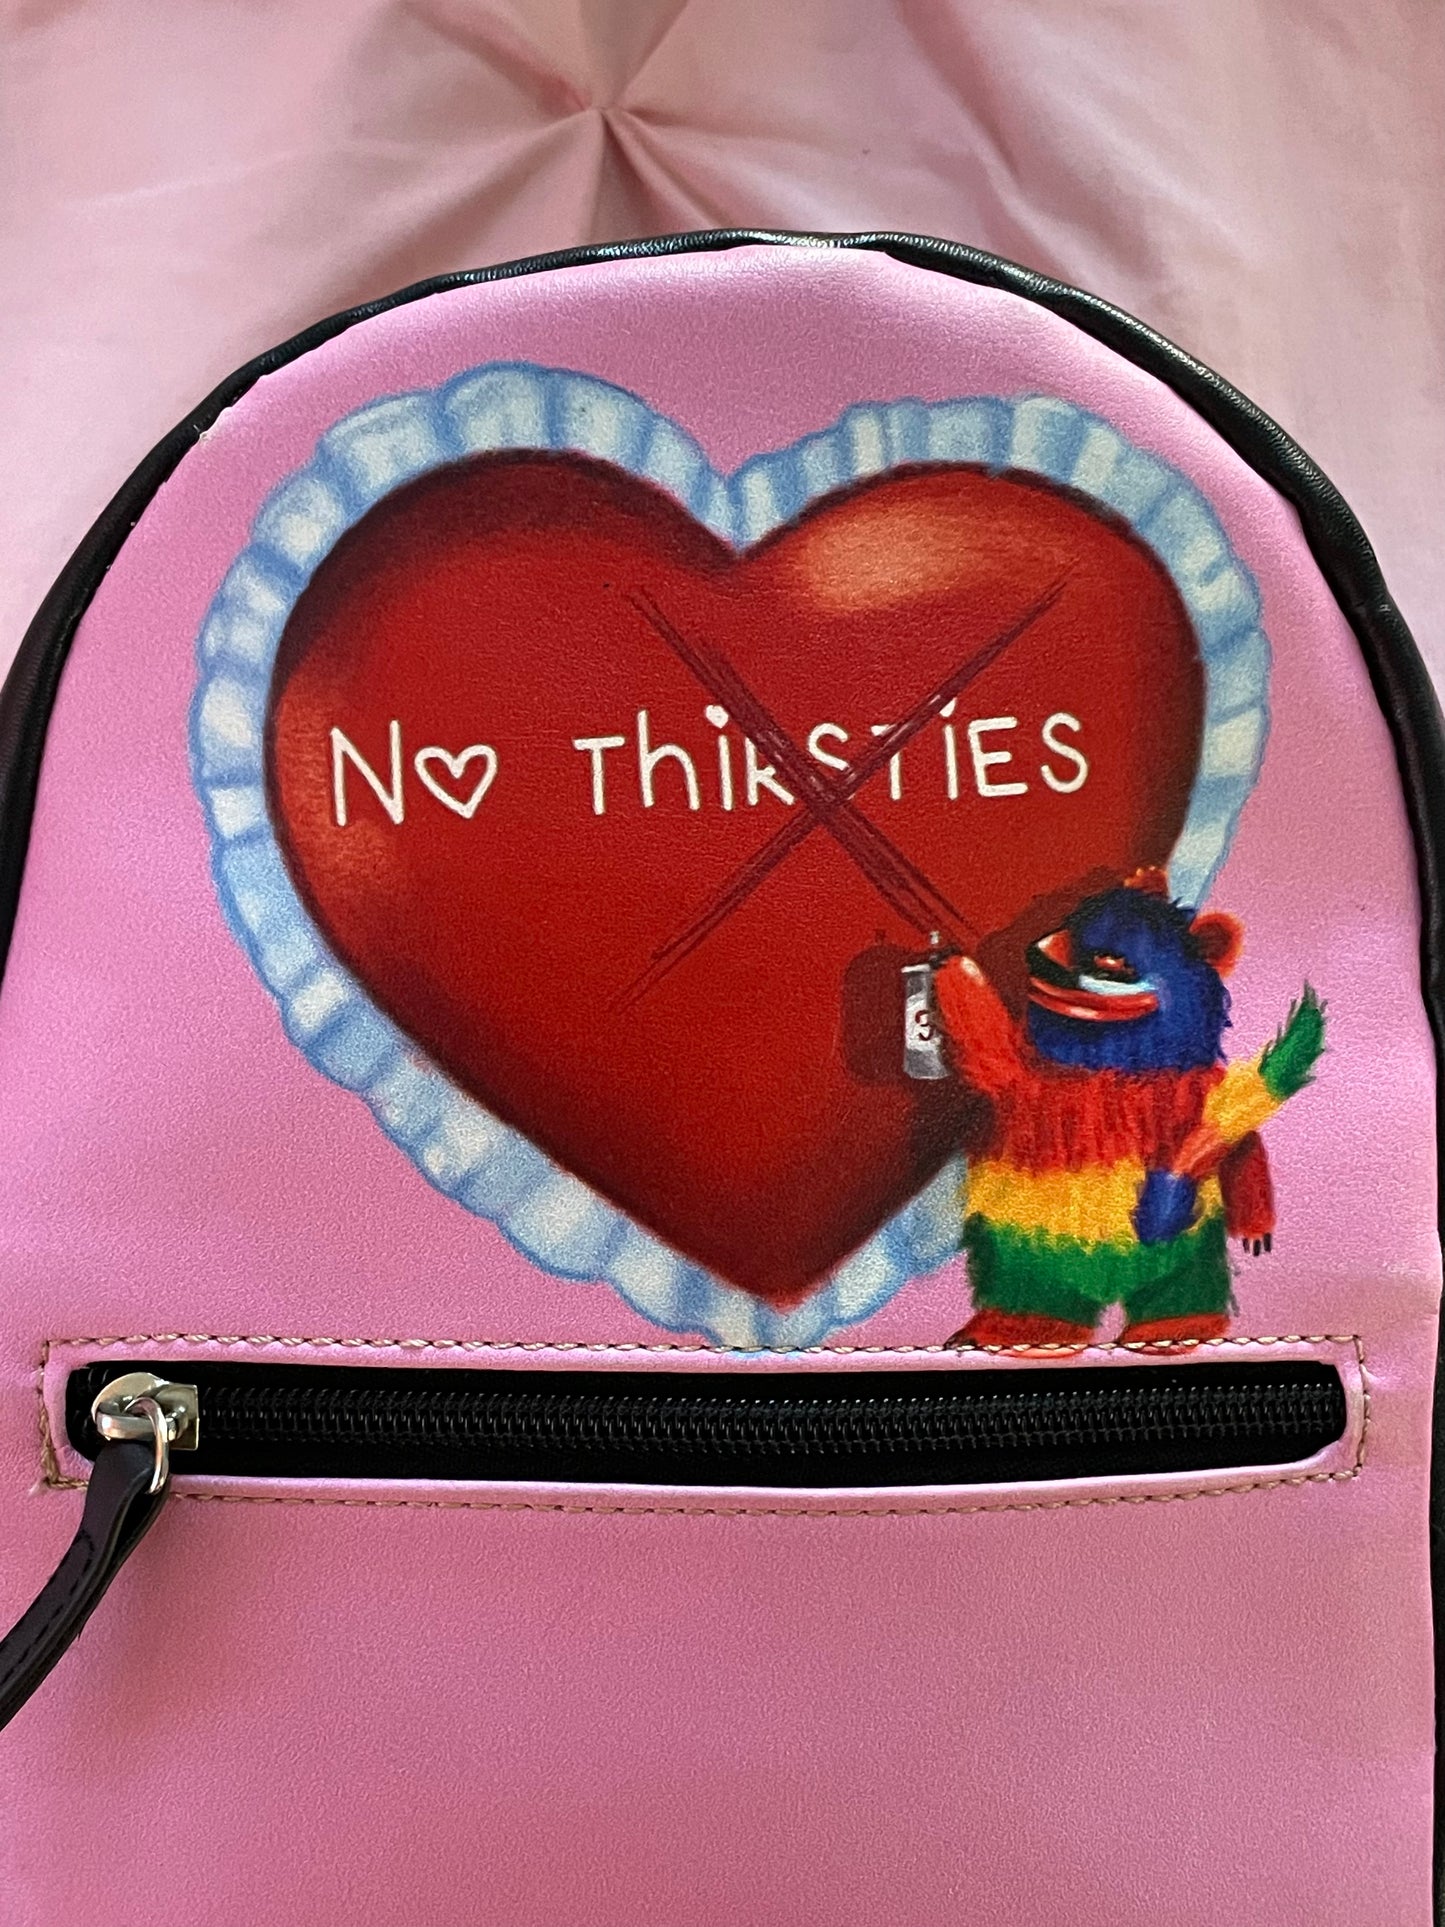 No Thirsties Purse Backpack